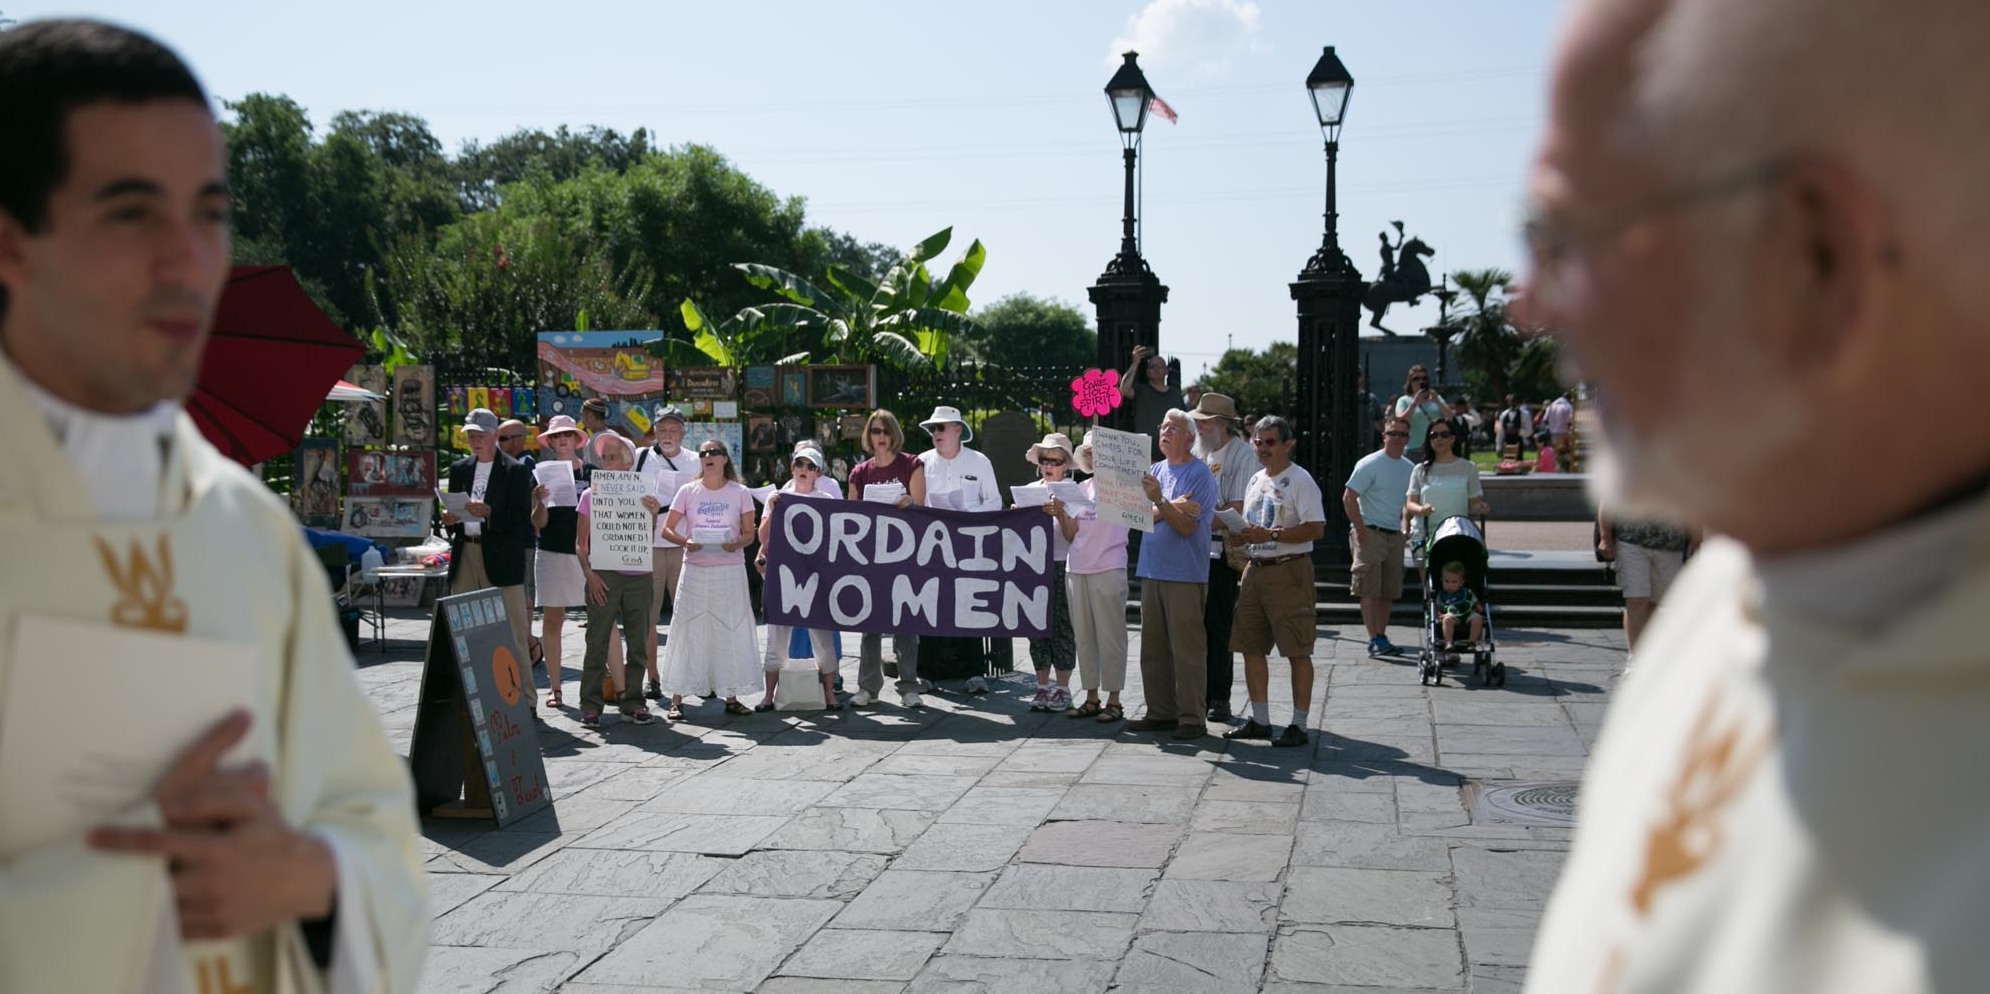 Supporters of women's ordination gather in Jackson Square in New Orleans outside the St. Louis Cathedral during the archdiocese's ordination ceremony for new priests in June 2015.